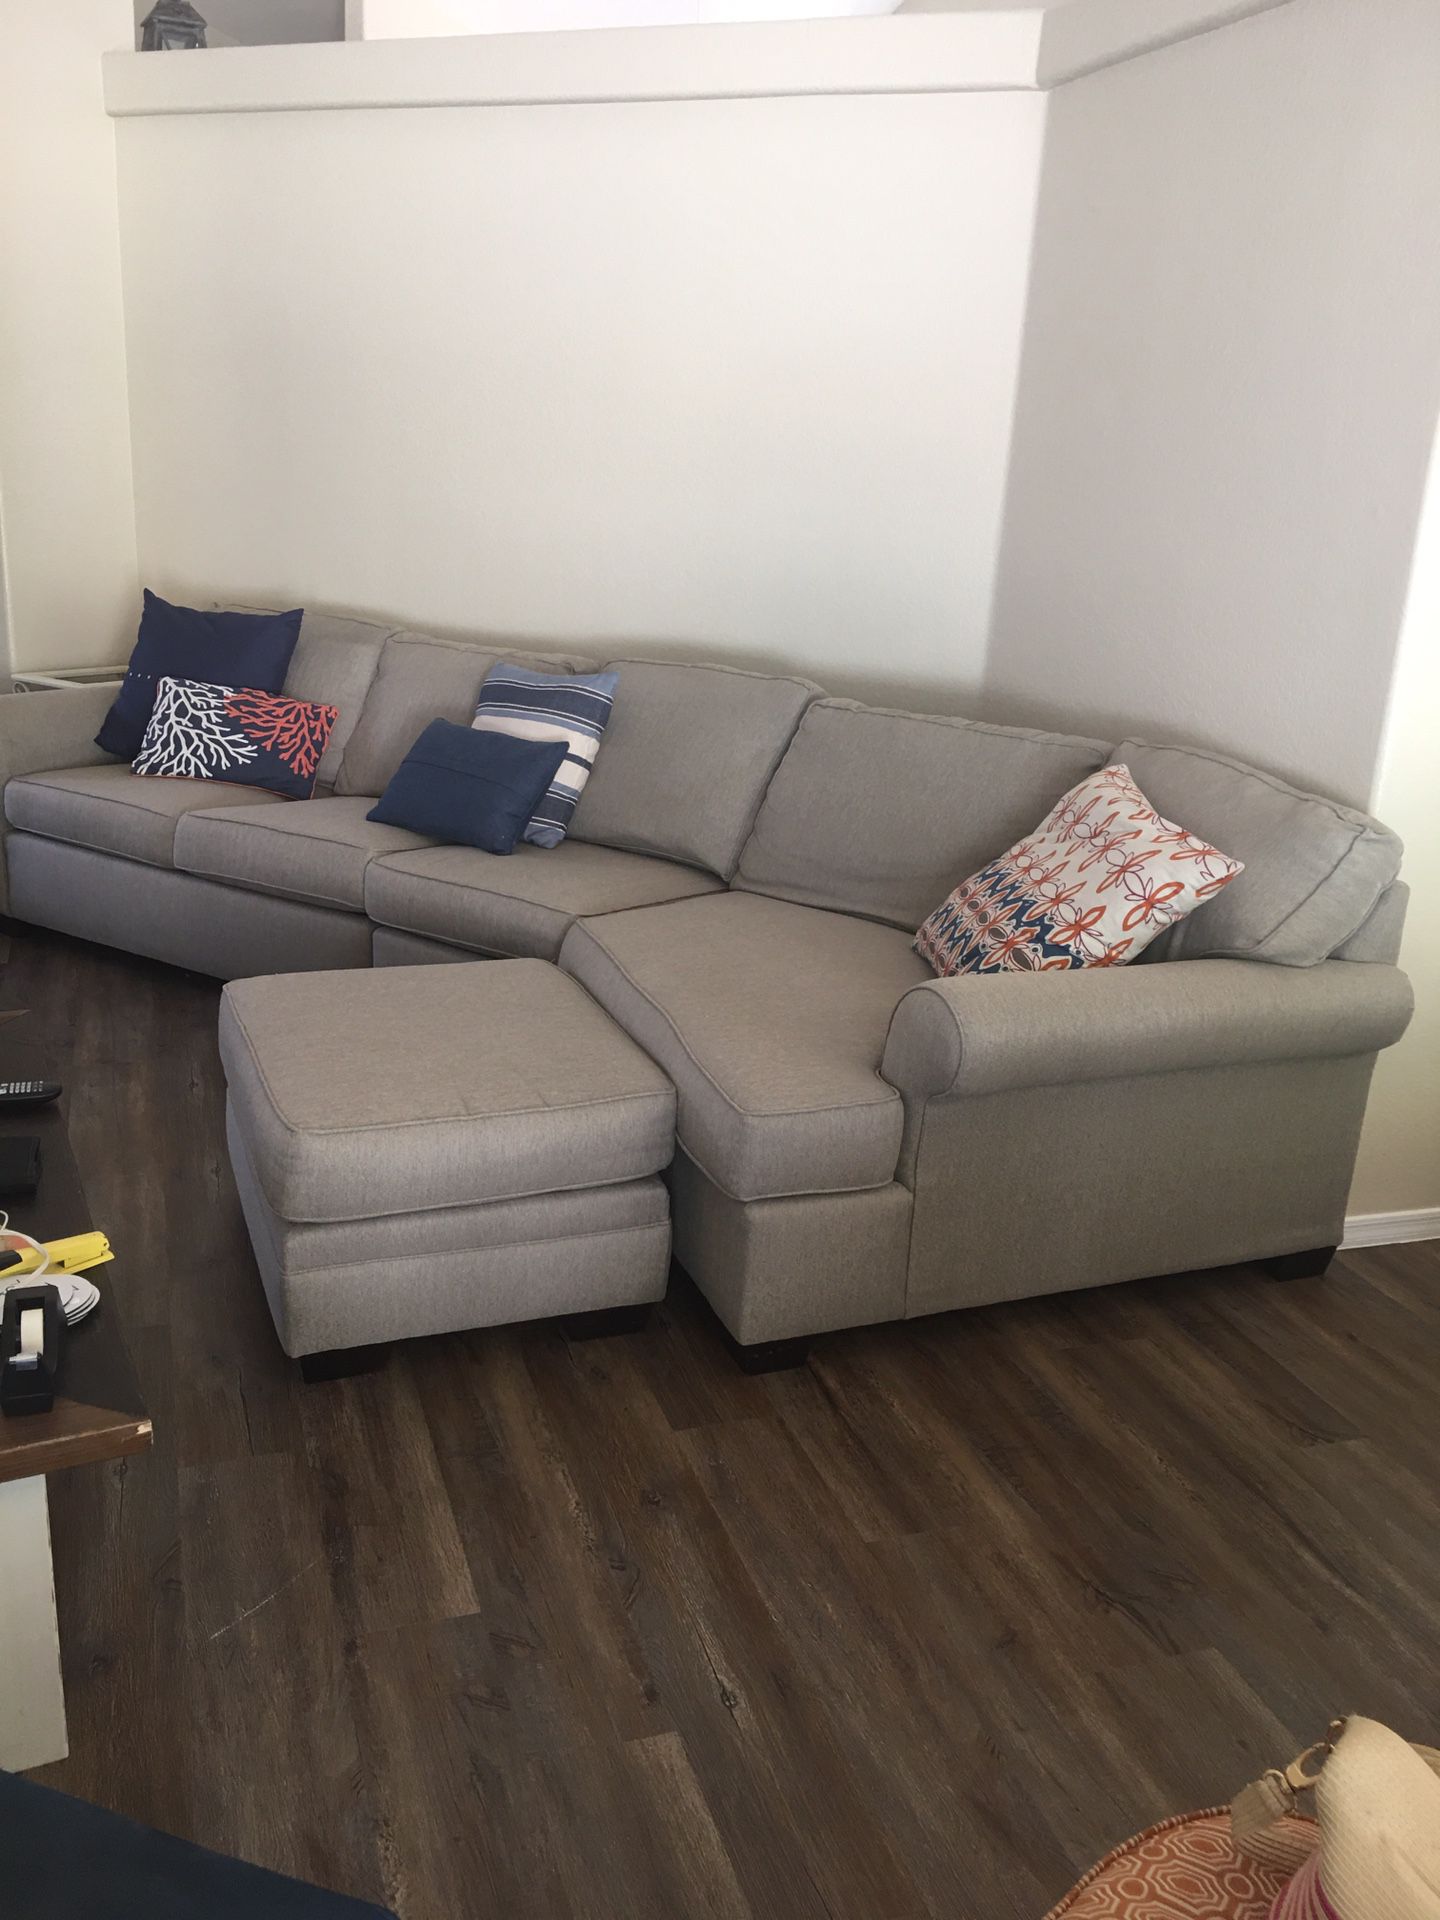 Sofa with foot stool 12 1/2 ft long. Cloth. Good condition